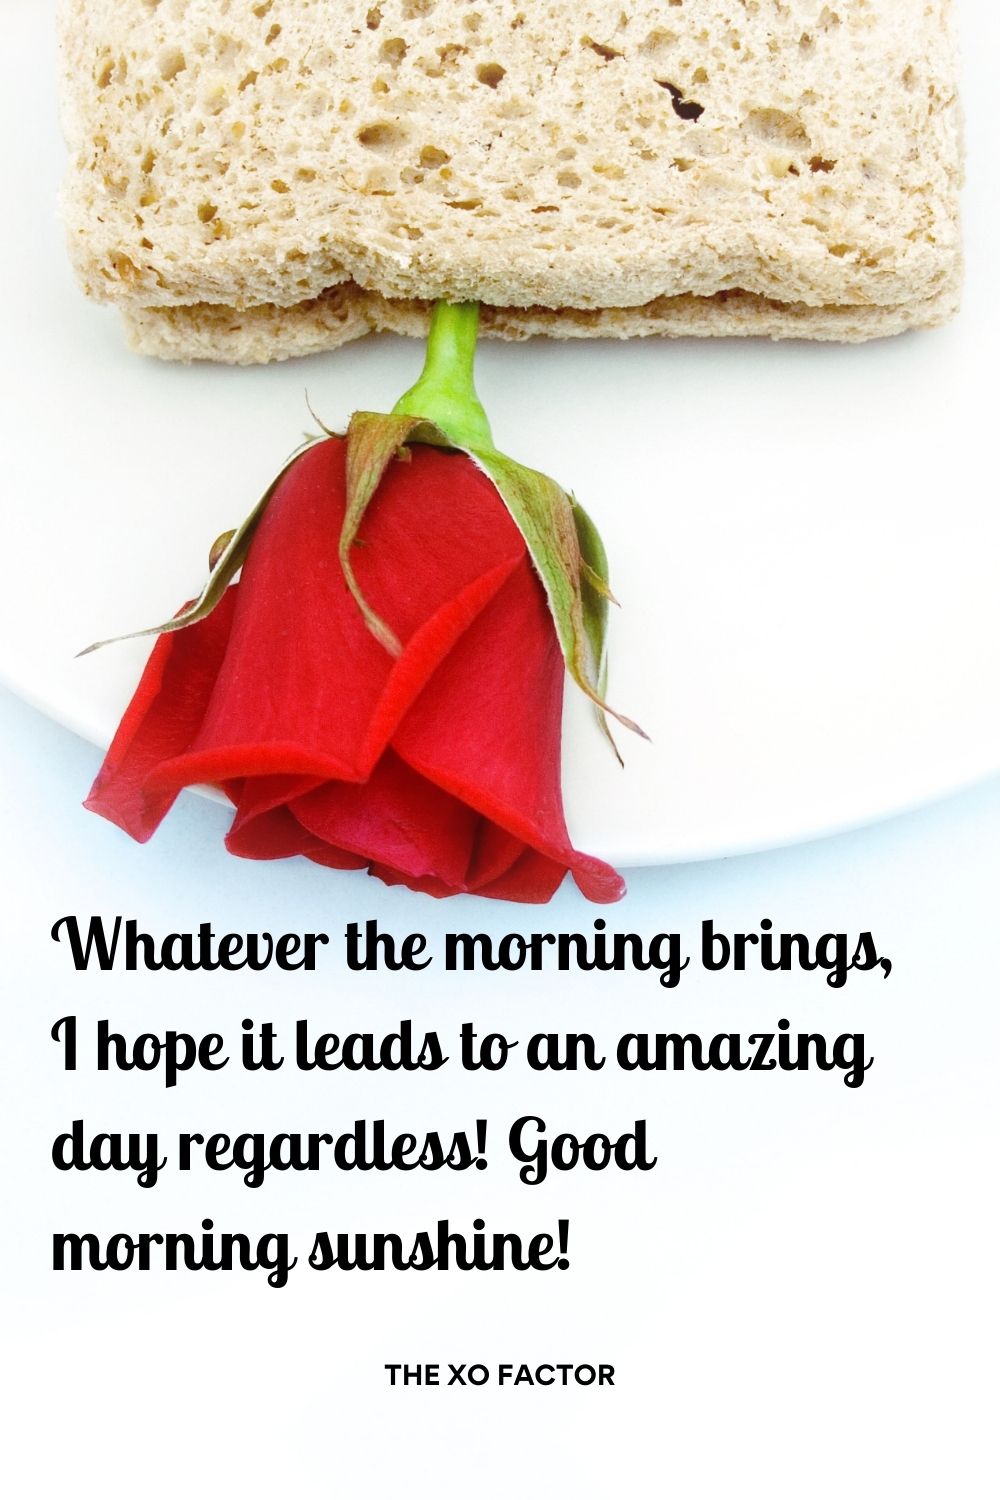 Whatever the morning brings, I hope it leads to an amazing day regardless! Good morning sunshine!